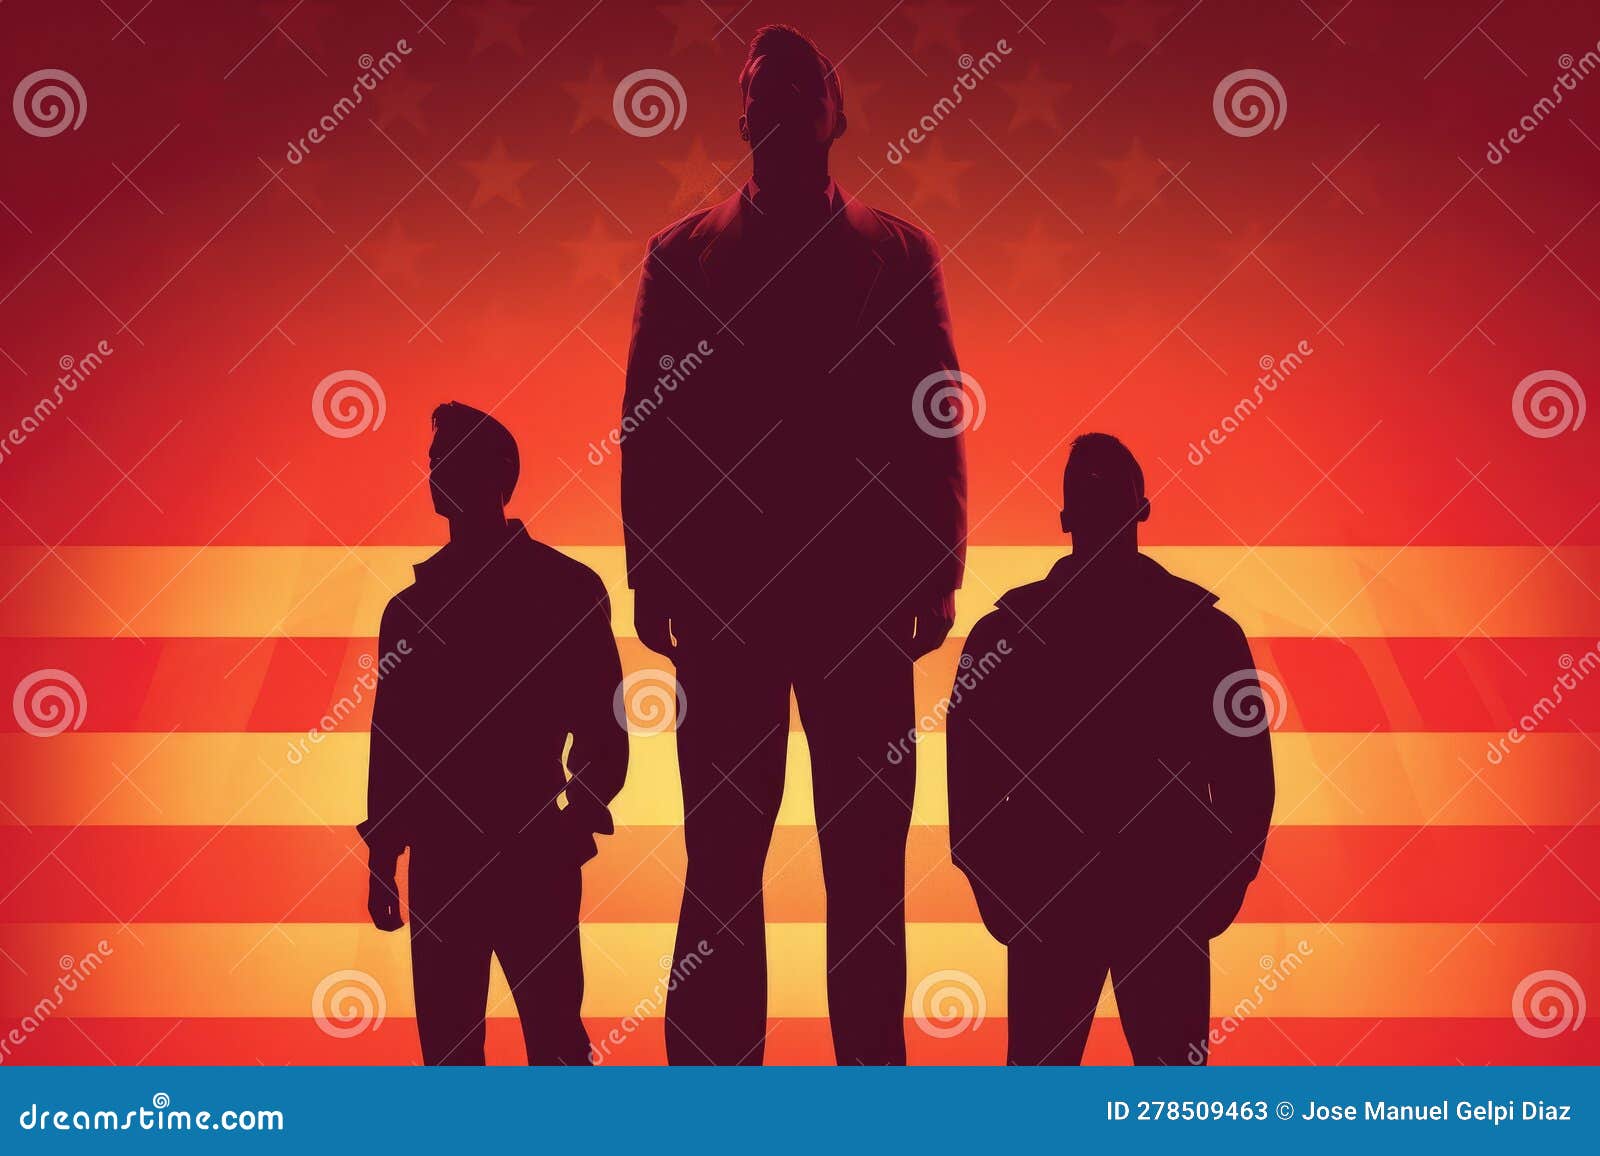  for independence day of the united states, july 4th - soldiers with american flag under a beautiful sun. generative